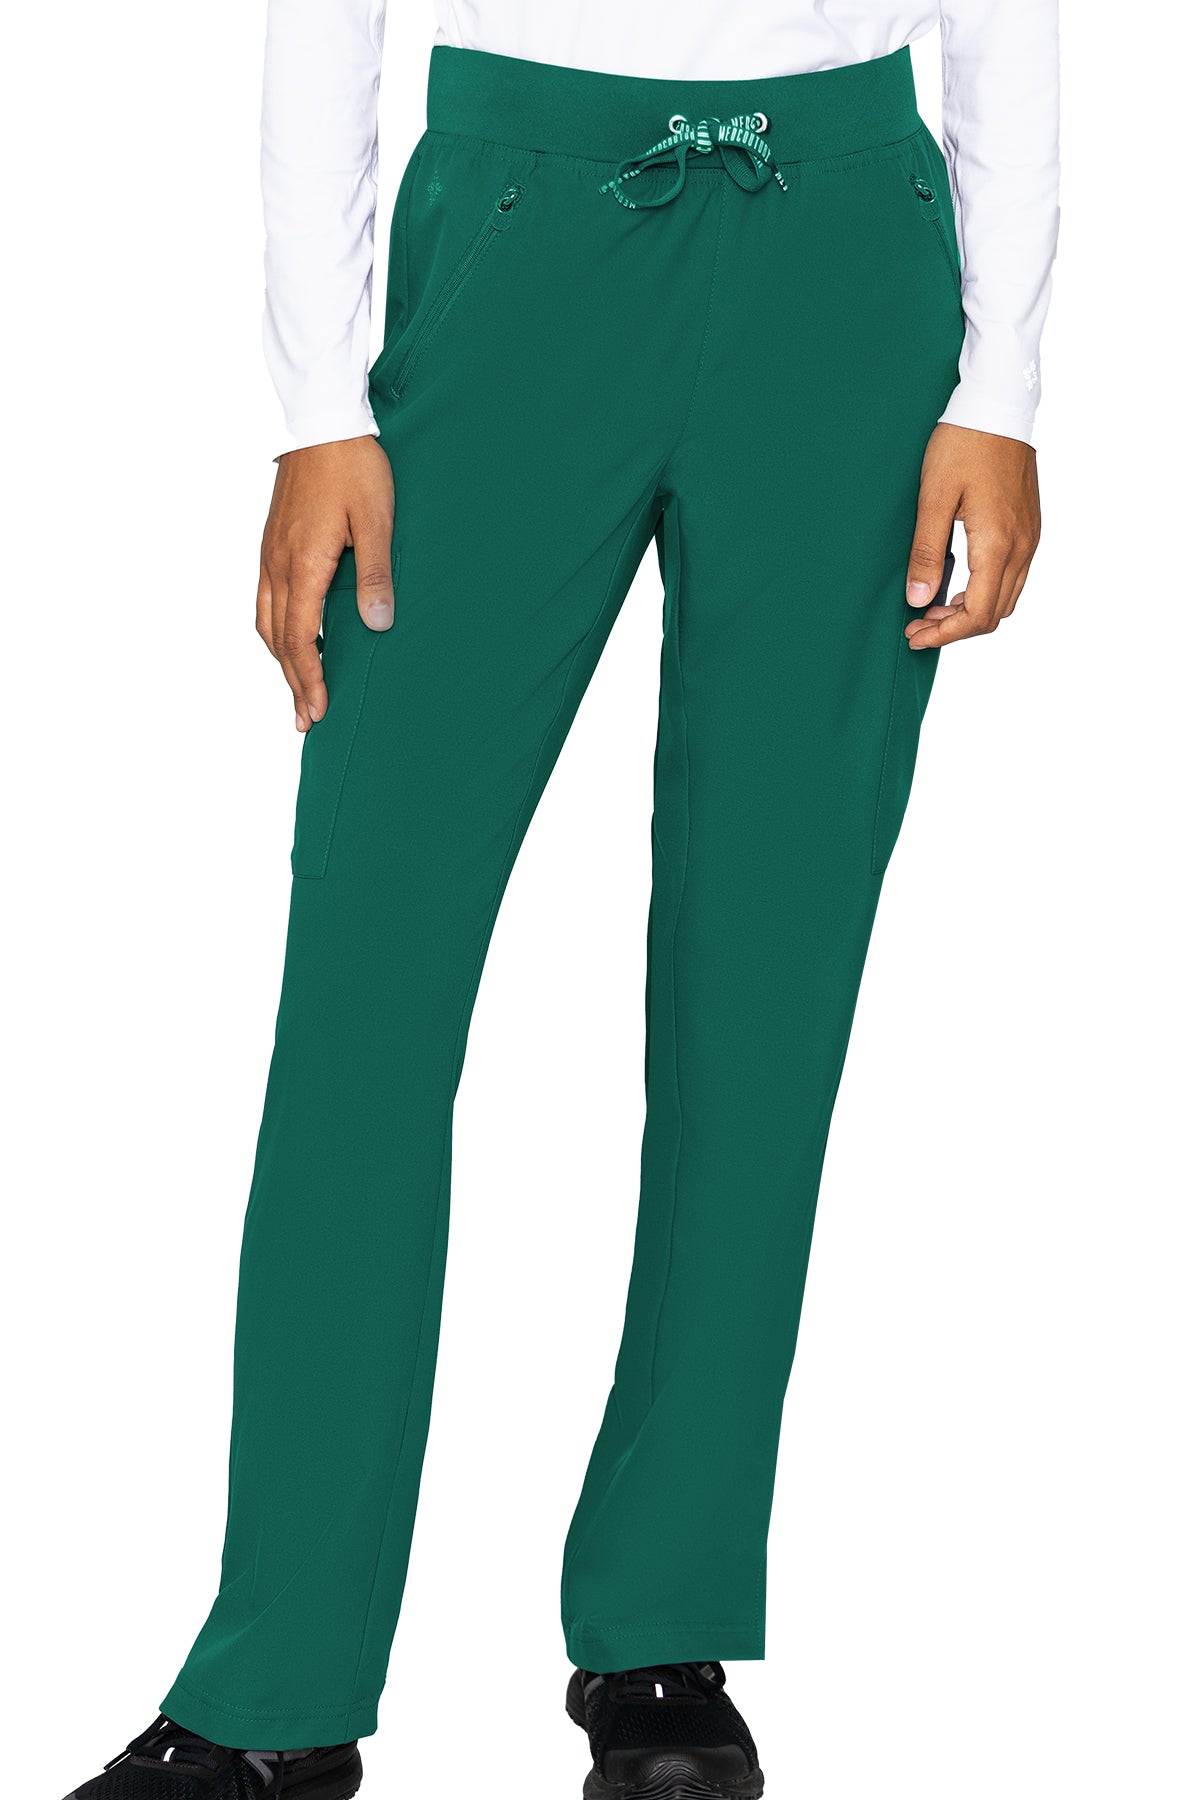 Med Couture Scrub Pants Insight Zipper Pocket Pant in Hunter at Parker's Clothing and Shoes